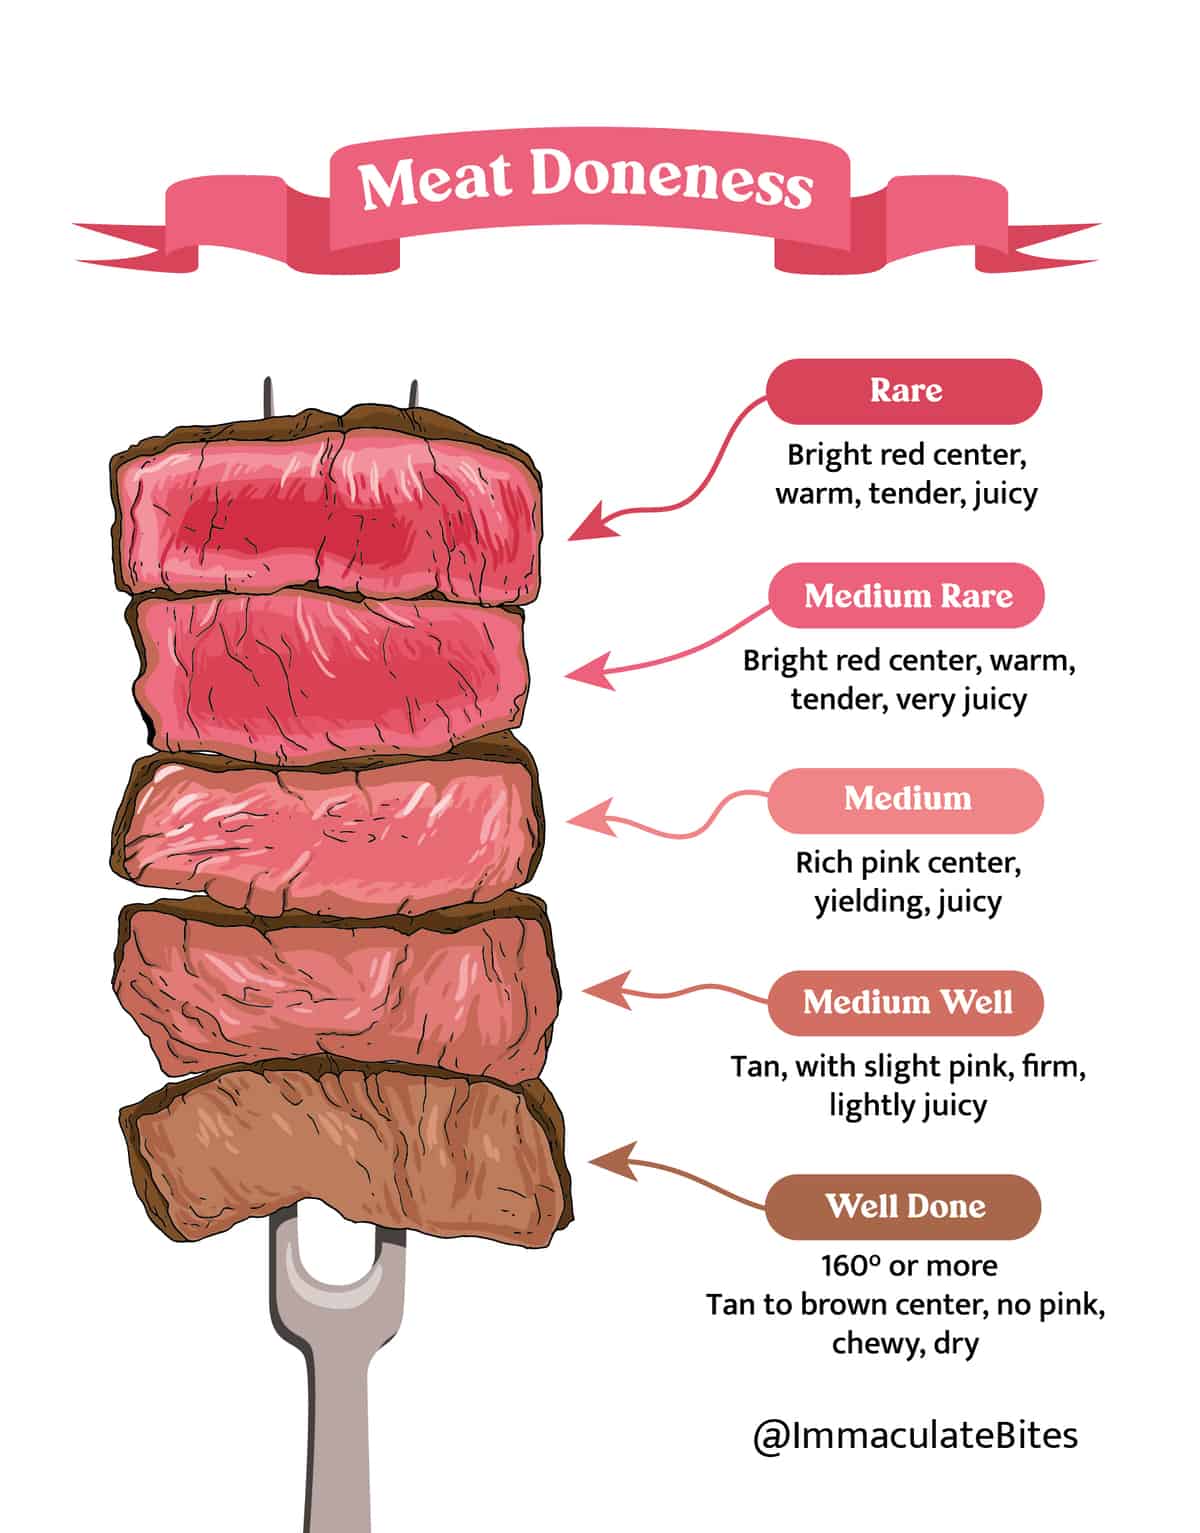 beef doneness guide immaculatebites